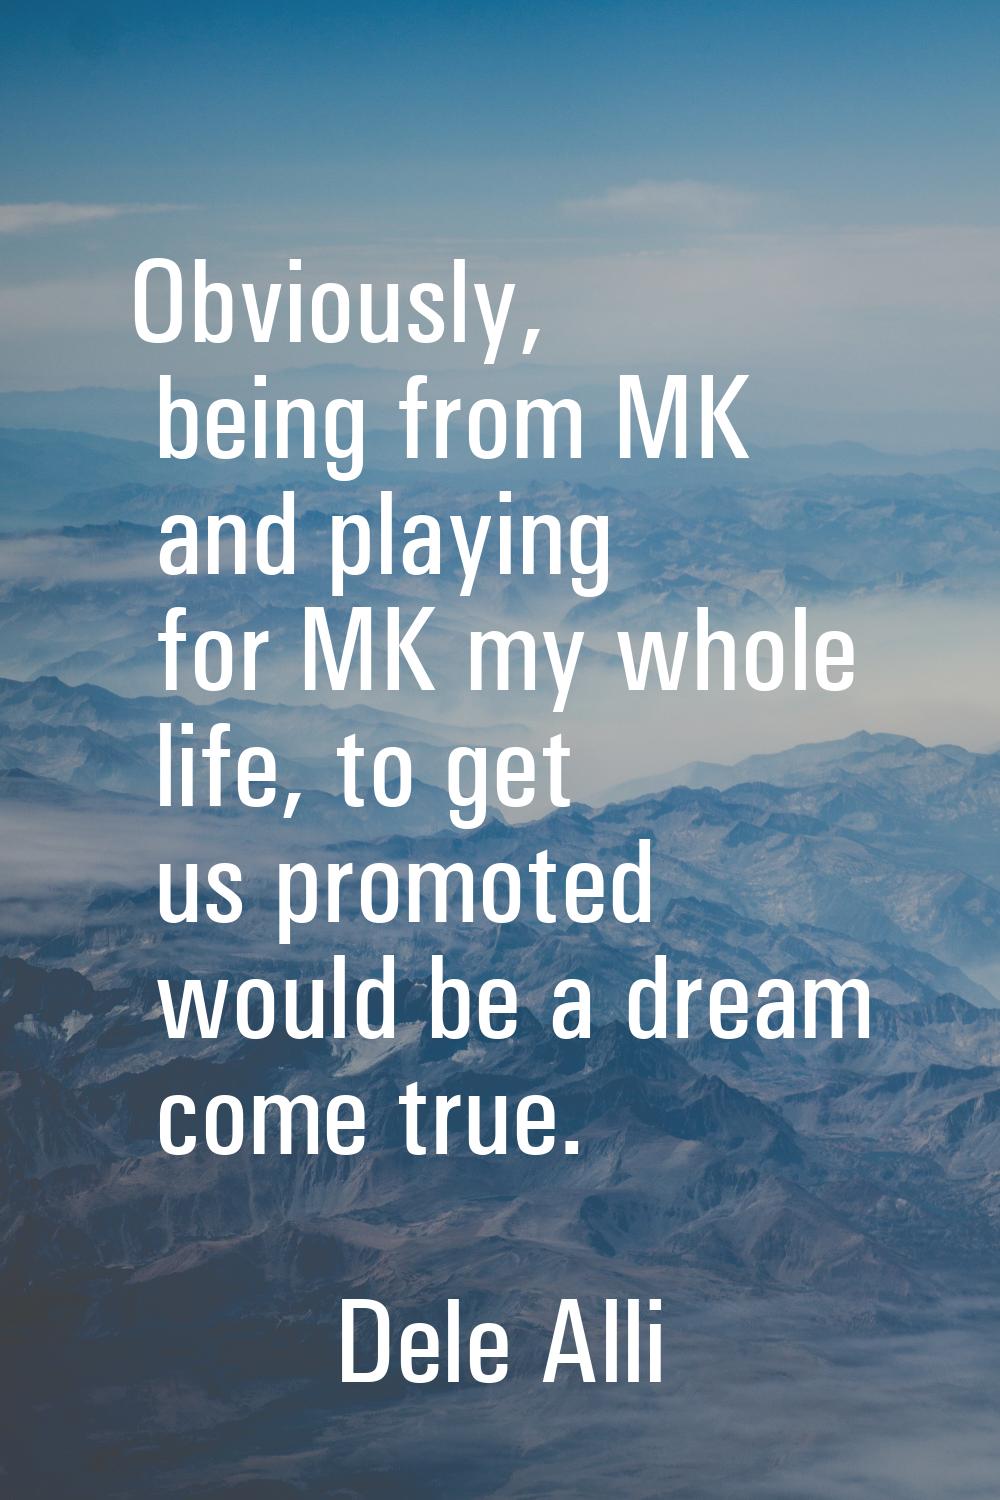 Obviously, being from MK and playing for MK my whole life, to get us promoted would be a dream come